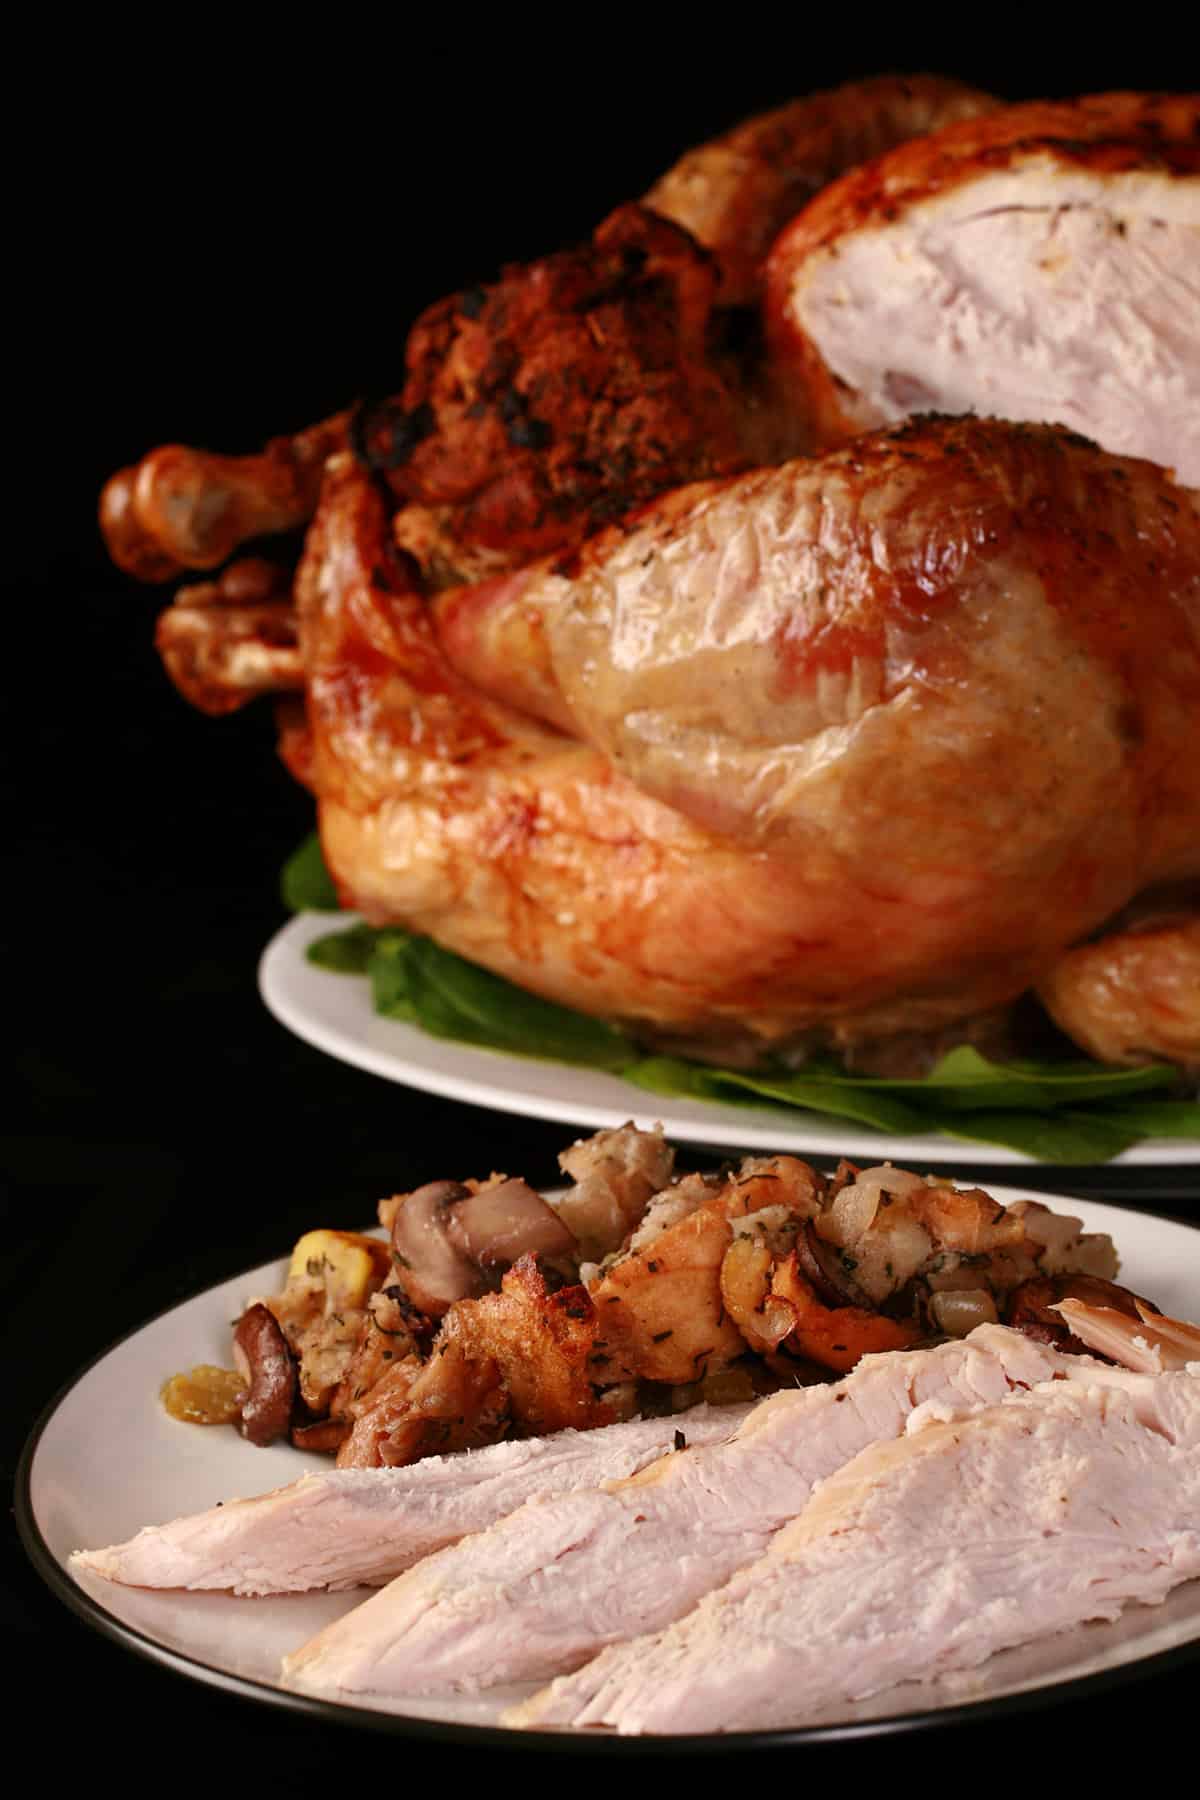 A plate of sliced turkey and stuffing in front of a roasted turkey.